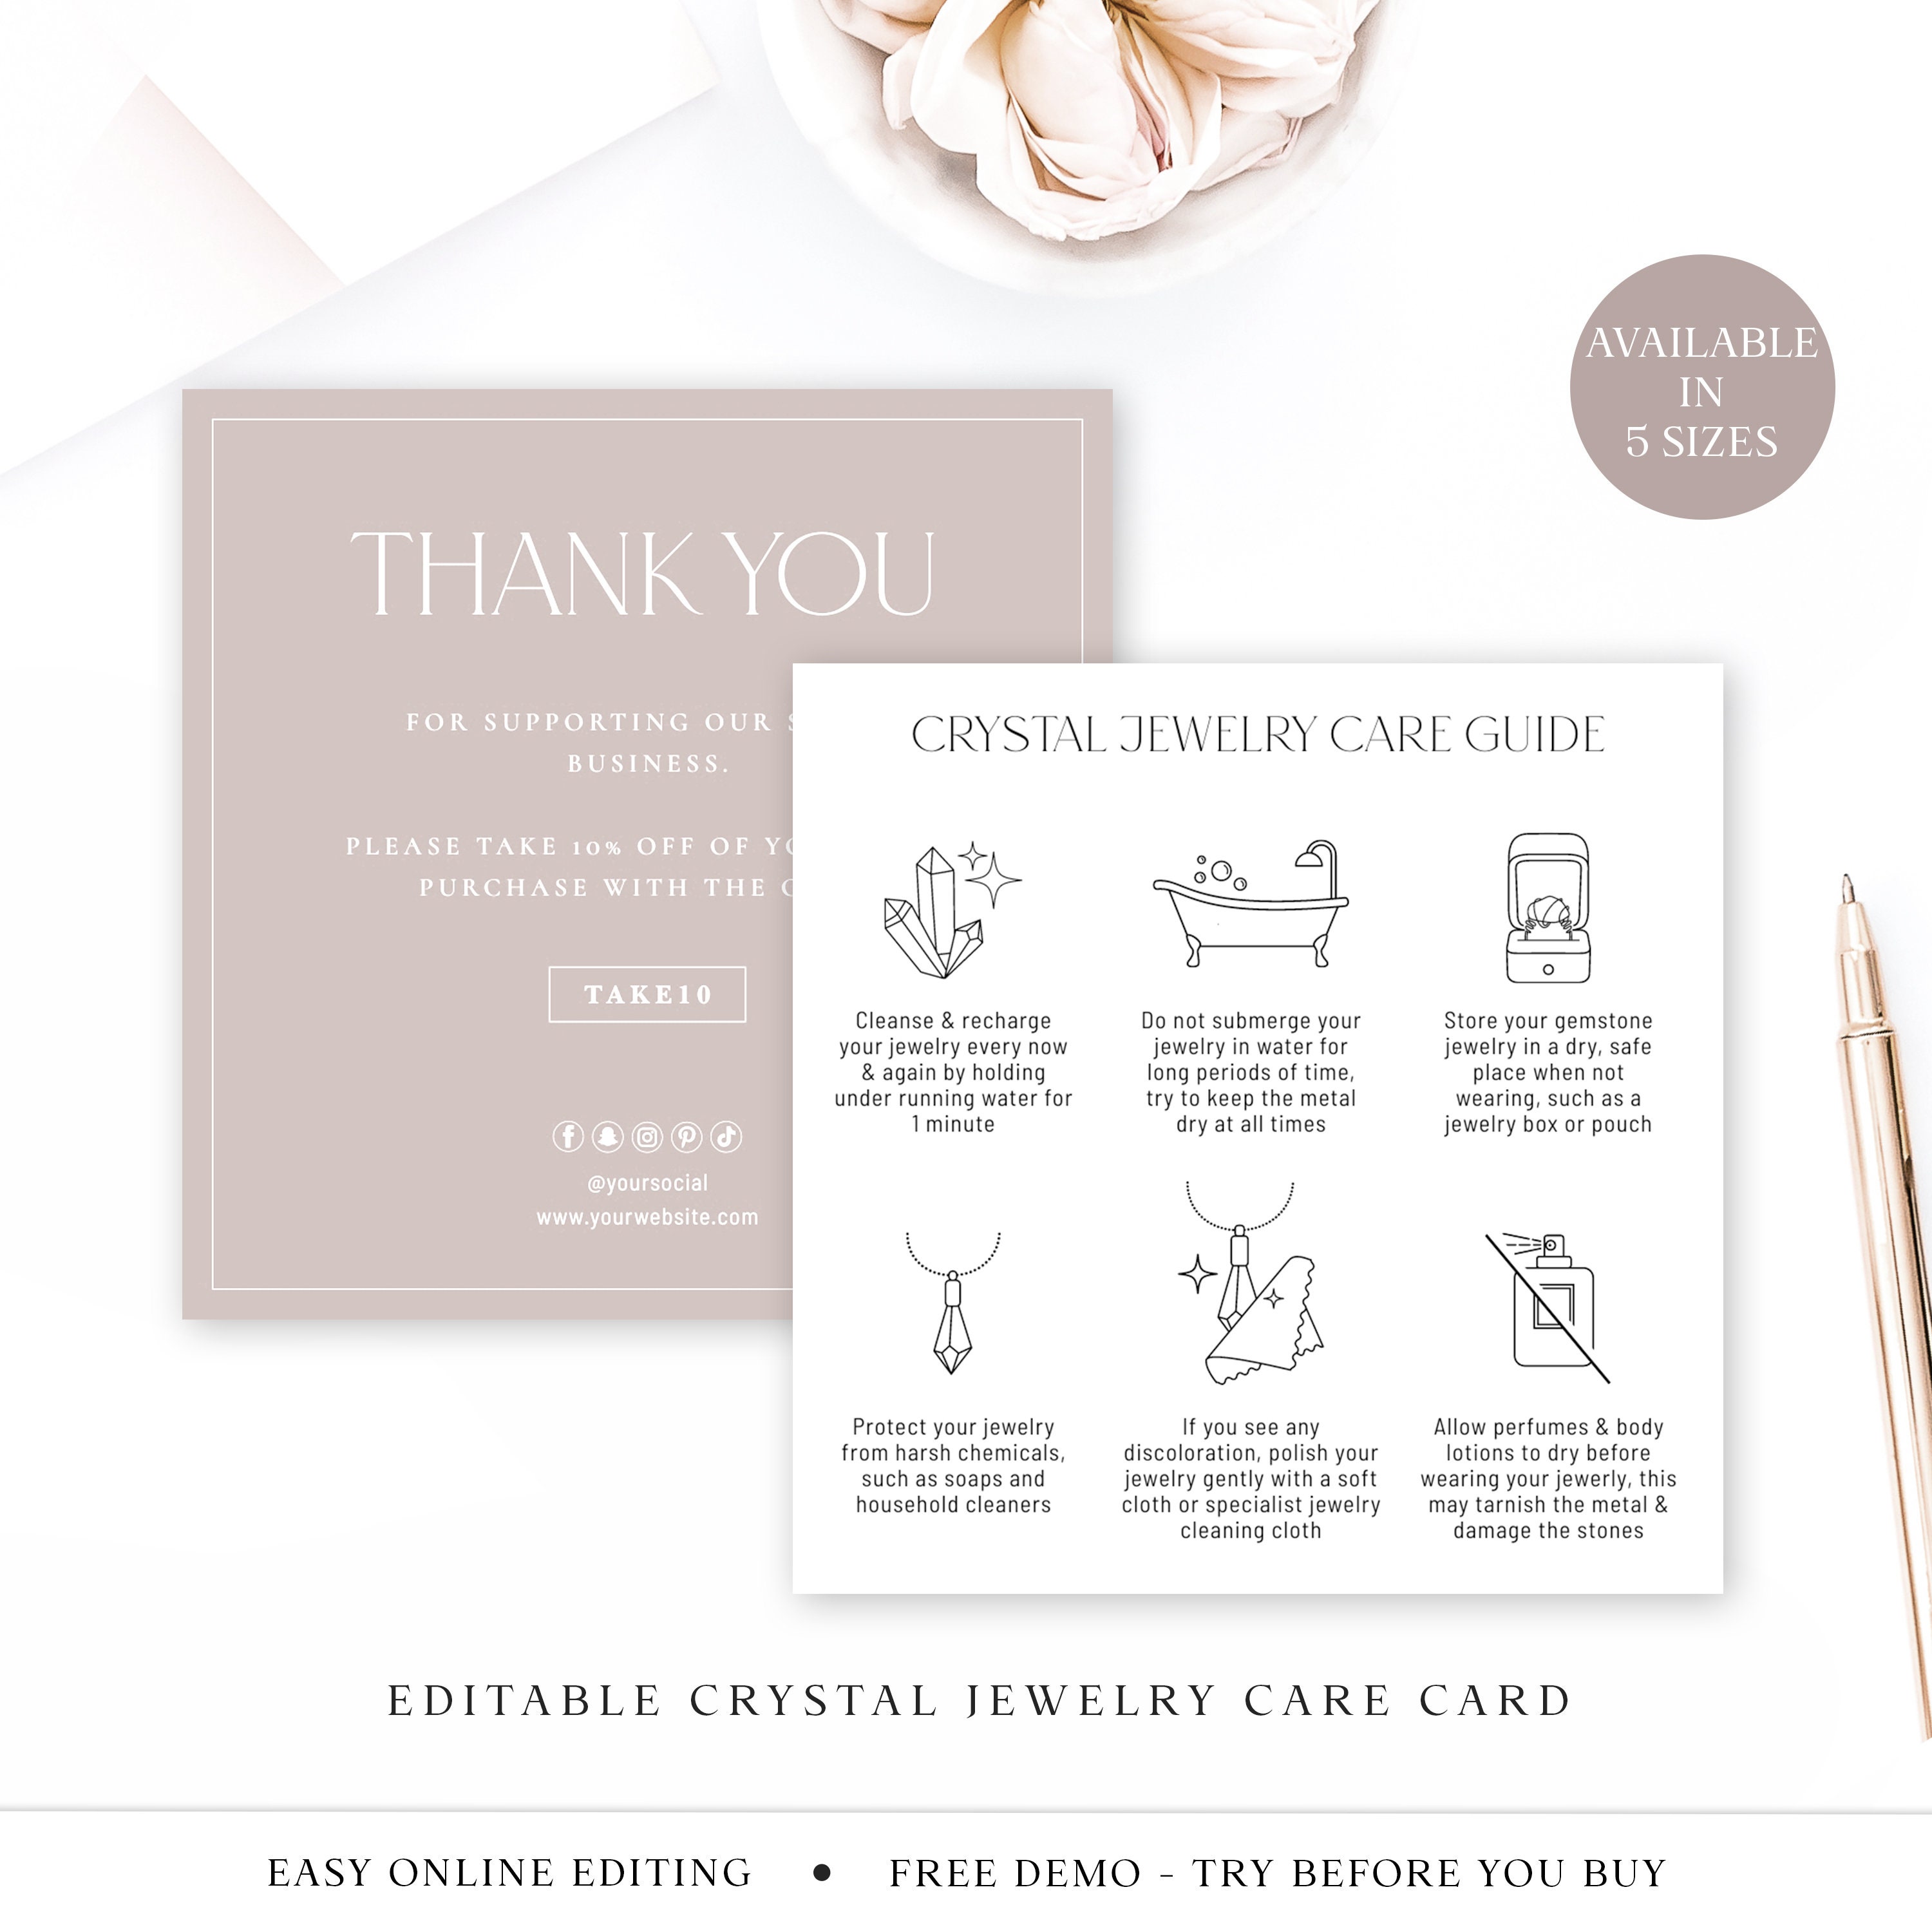 Jewelry Care Card, Jewelry Care Instructions Card, Jewelry Packaging  Insert, Small Business Thank You Cards, Editable Canva Template. TDS-05 